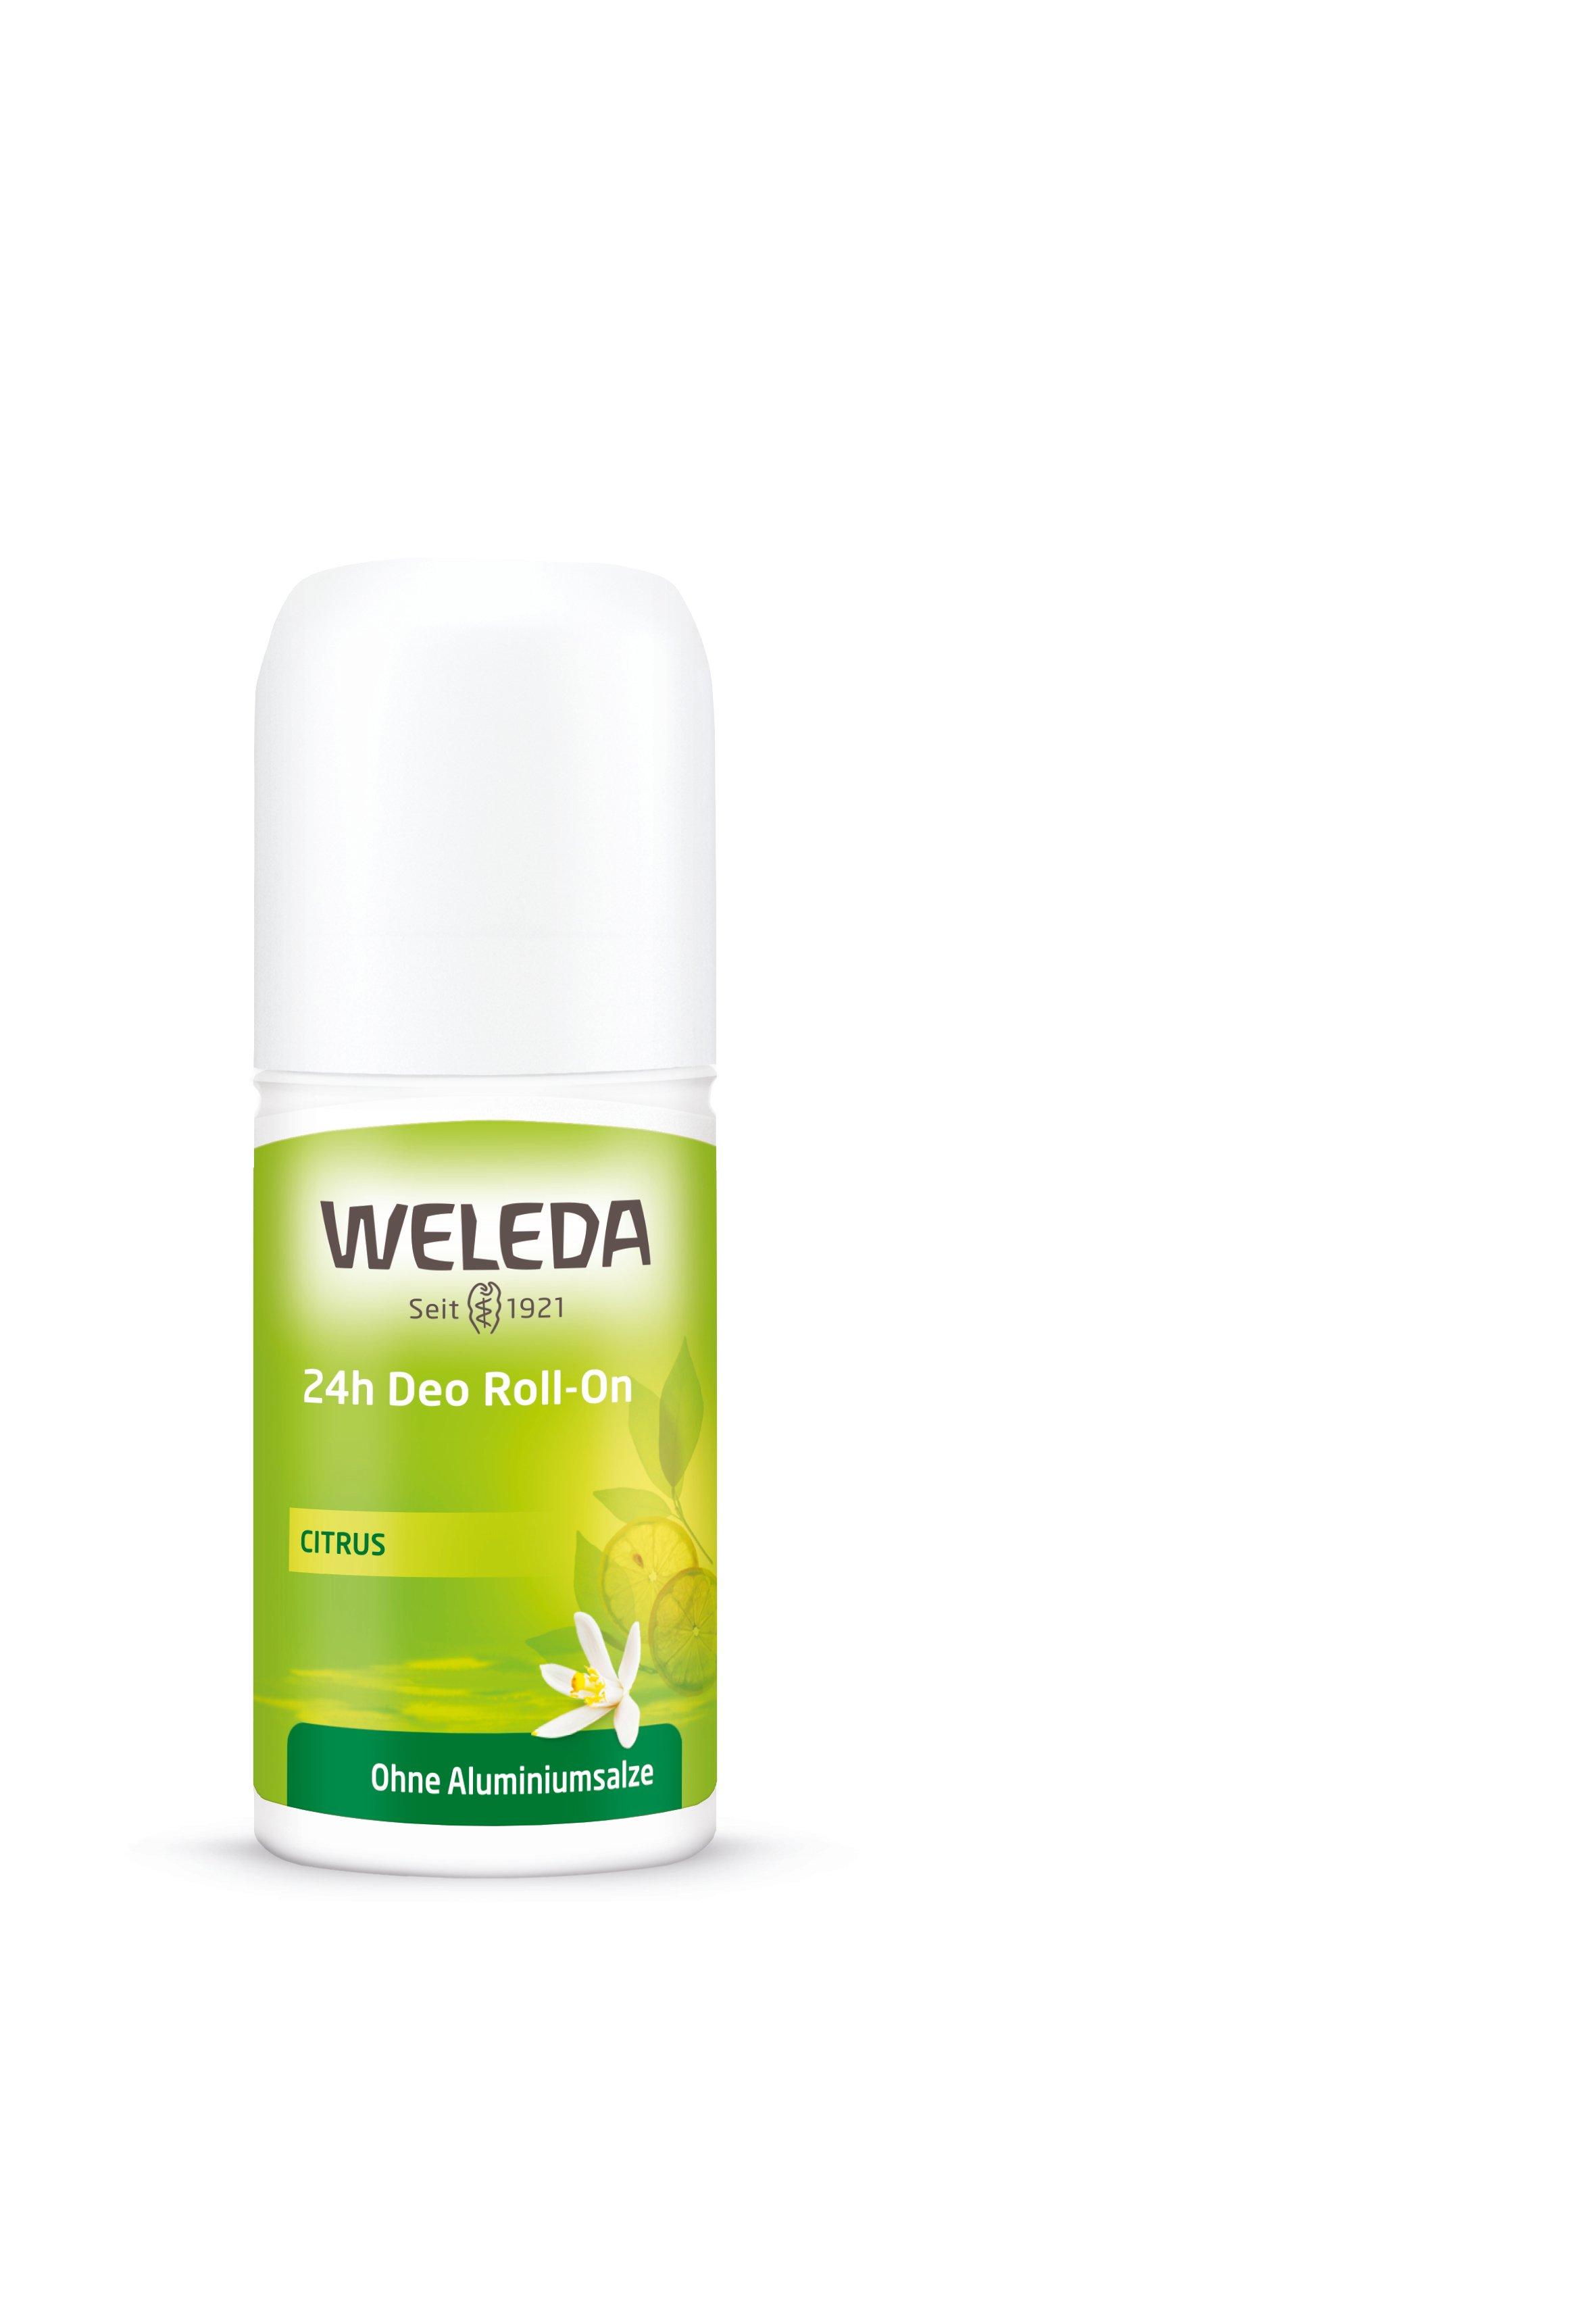 Image of WELEDA Citrus 24h Deo Roll-On Citrus 24h Deo Roll-On - 50ml